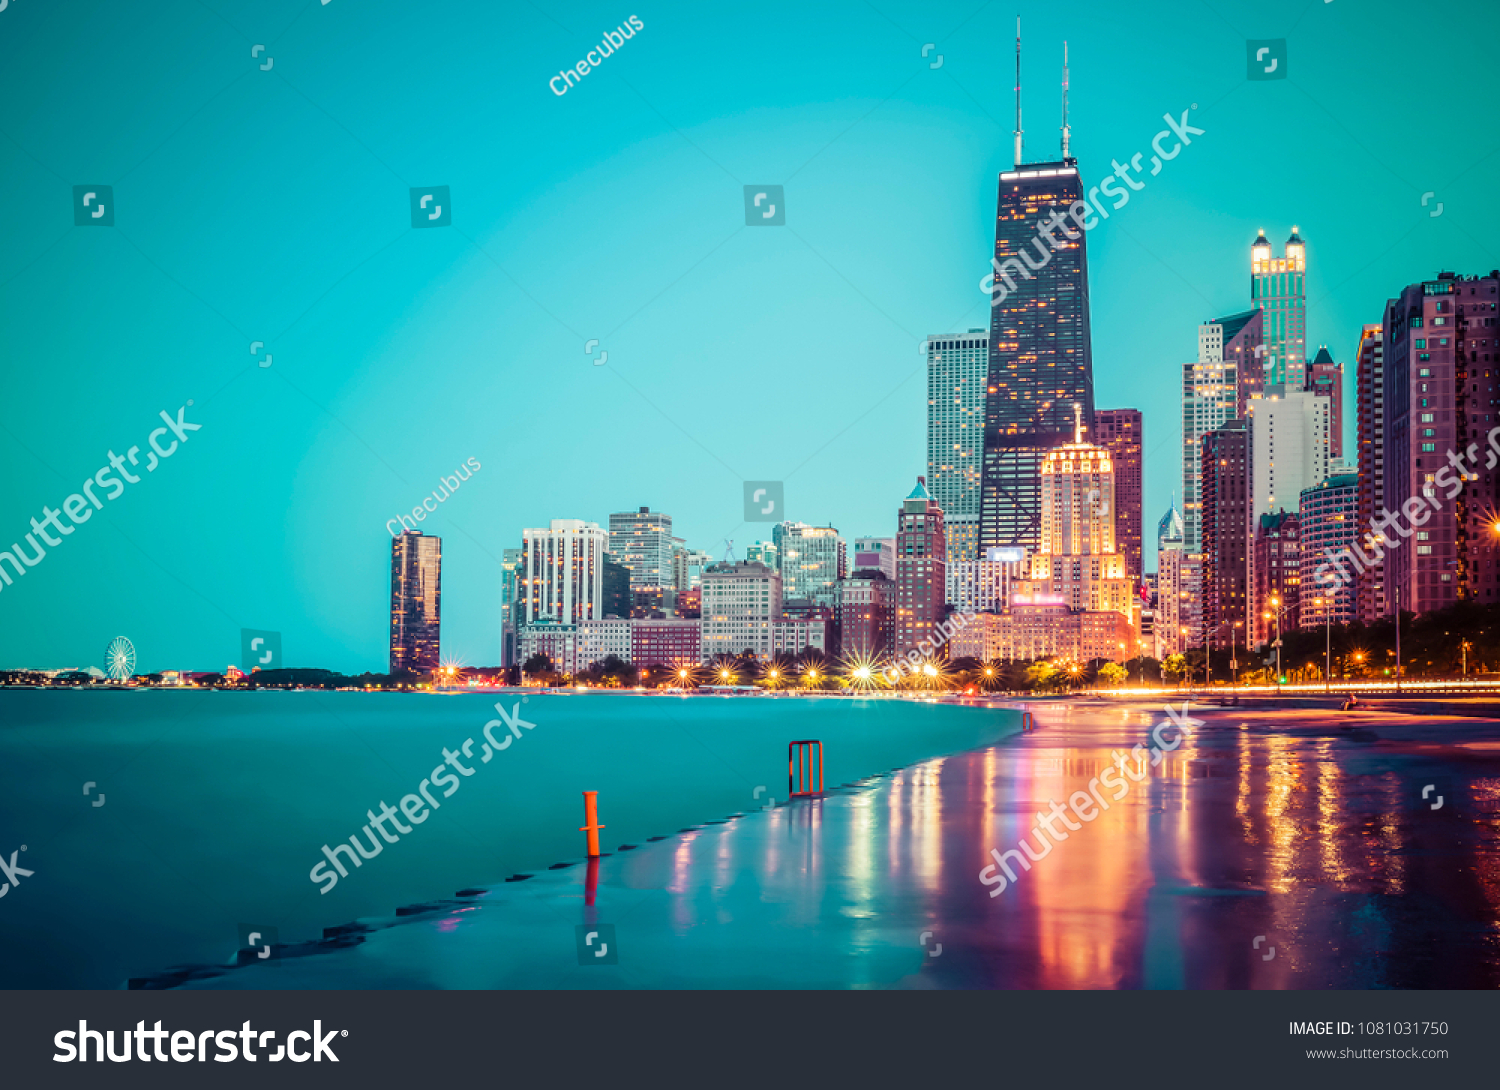 Chicago skyline at sunset with cloudy sky and reflection in water. #1081031750